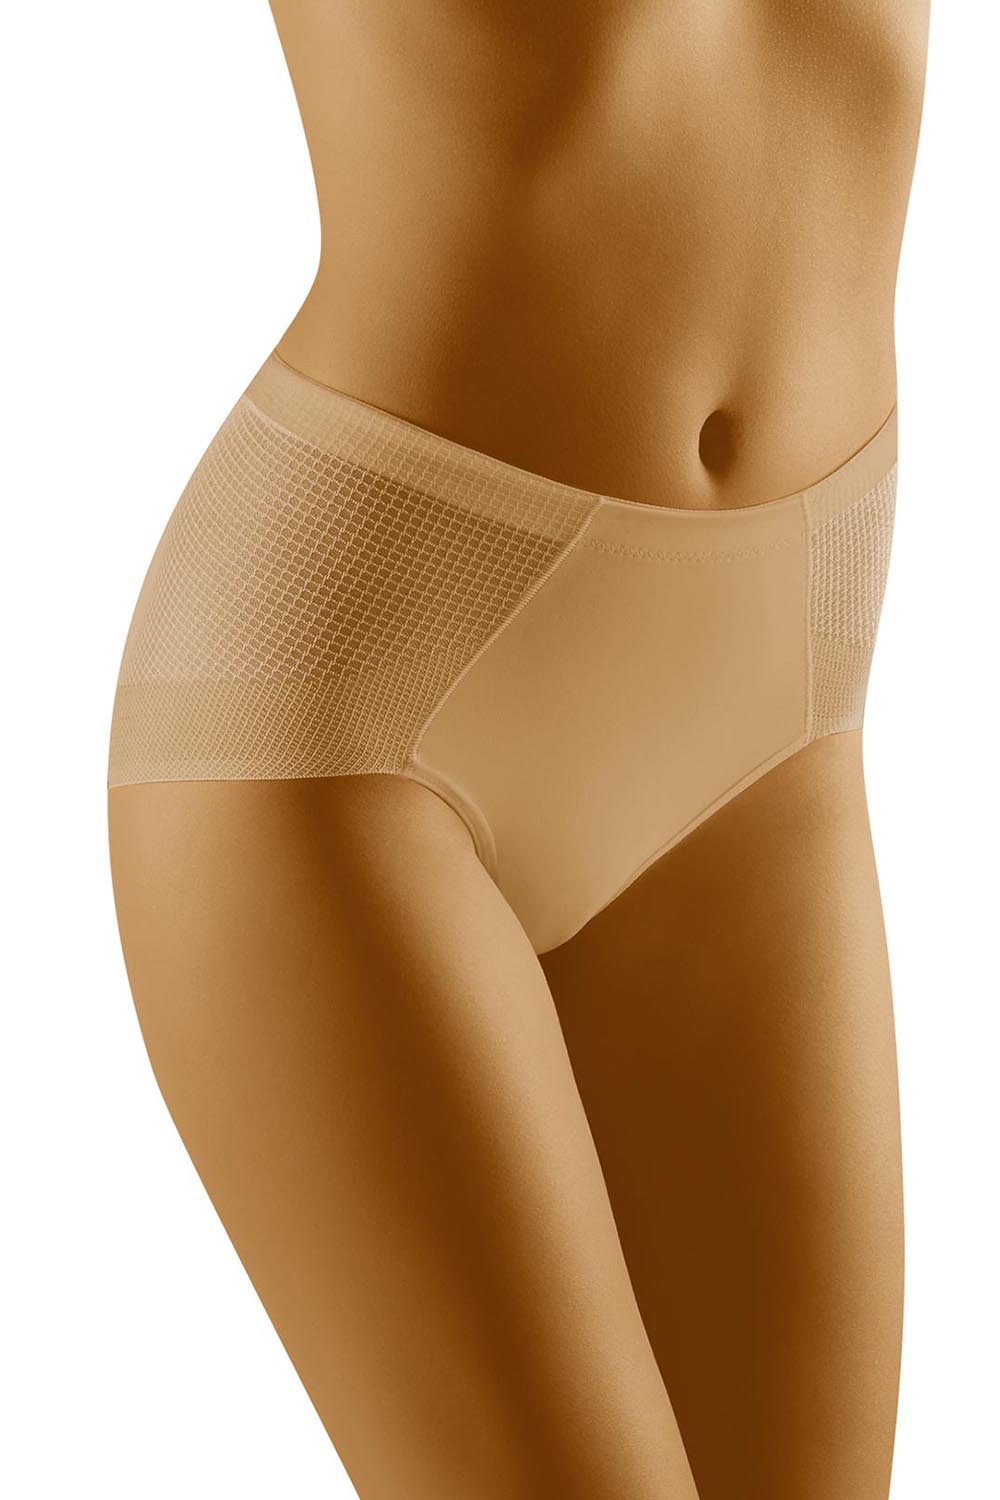 Wolbar smooth shaping briefs WB317 New Panties Comfortable Underwear,Top Quality 